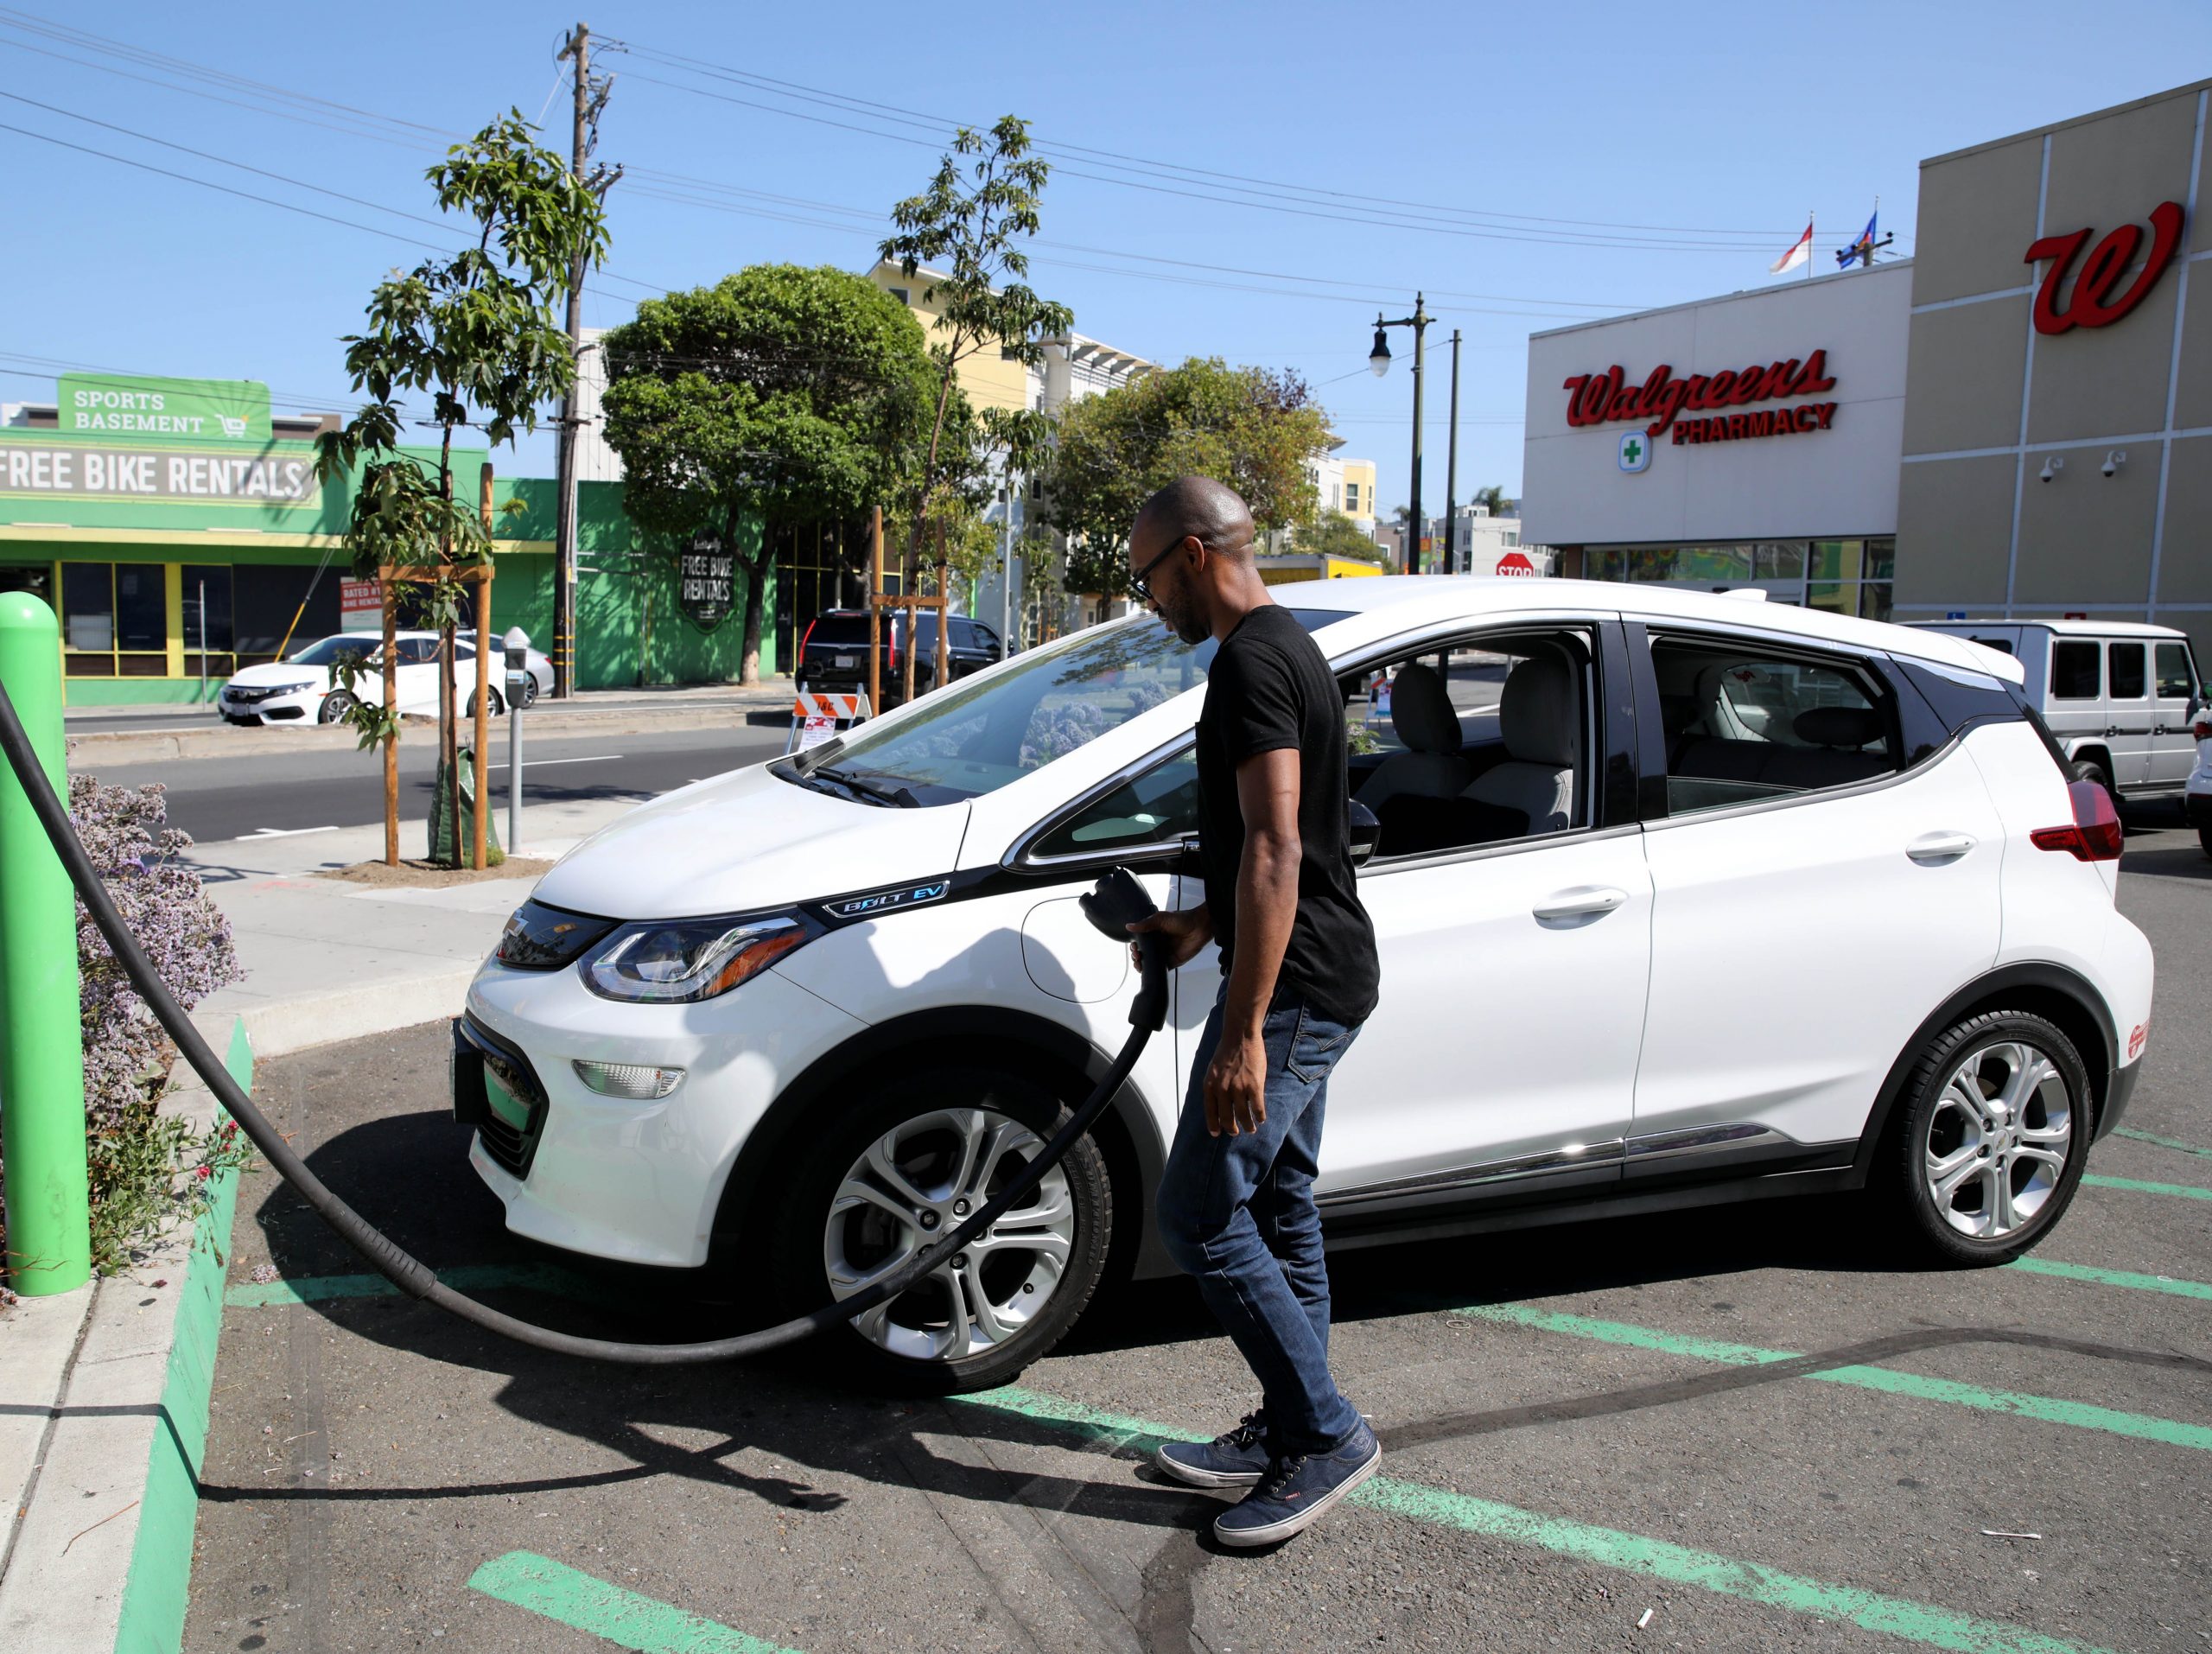 A man charges his white Chevrolet Bolt EV on a sunny day in a pharmacy parking lot.